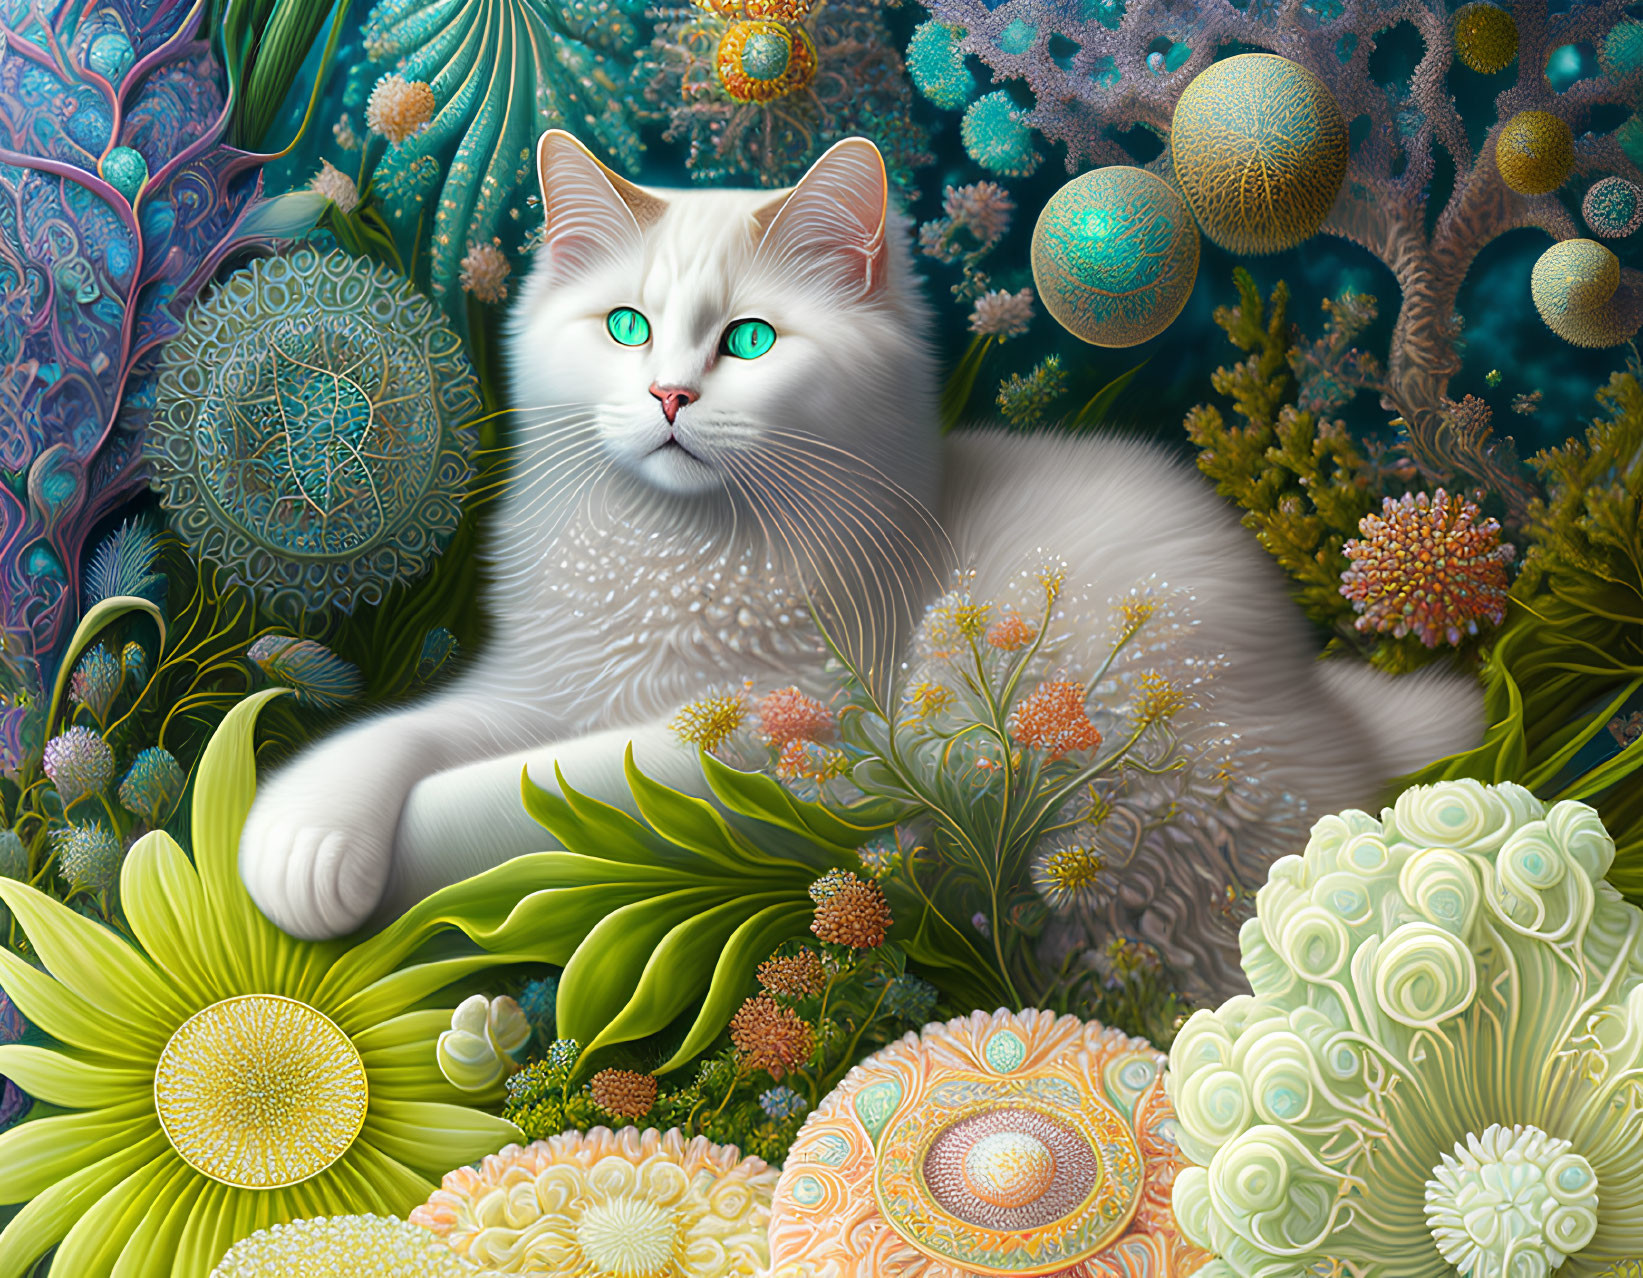 White Cat with Green Eyes Resting in Vibrant Floral and Fractal Patterns